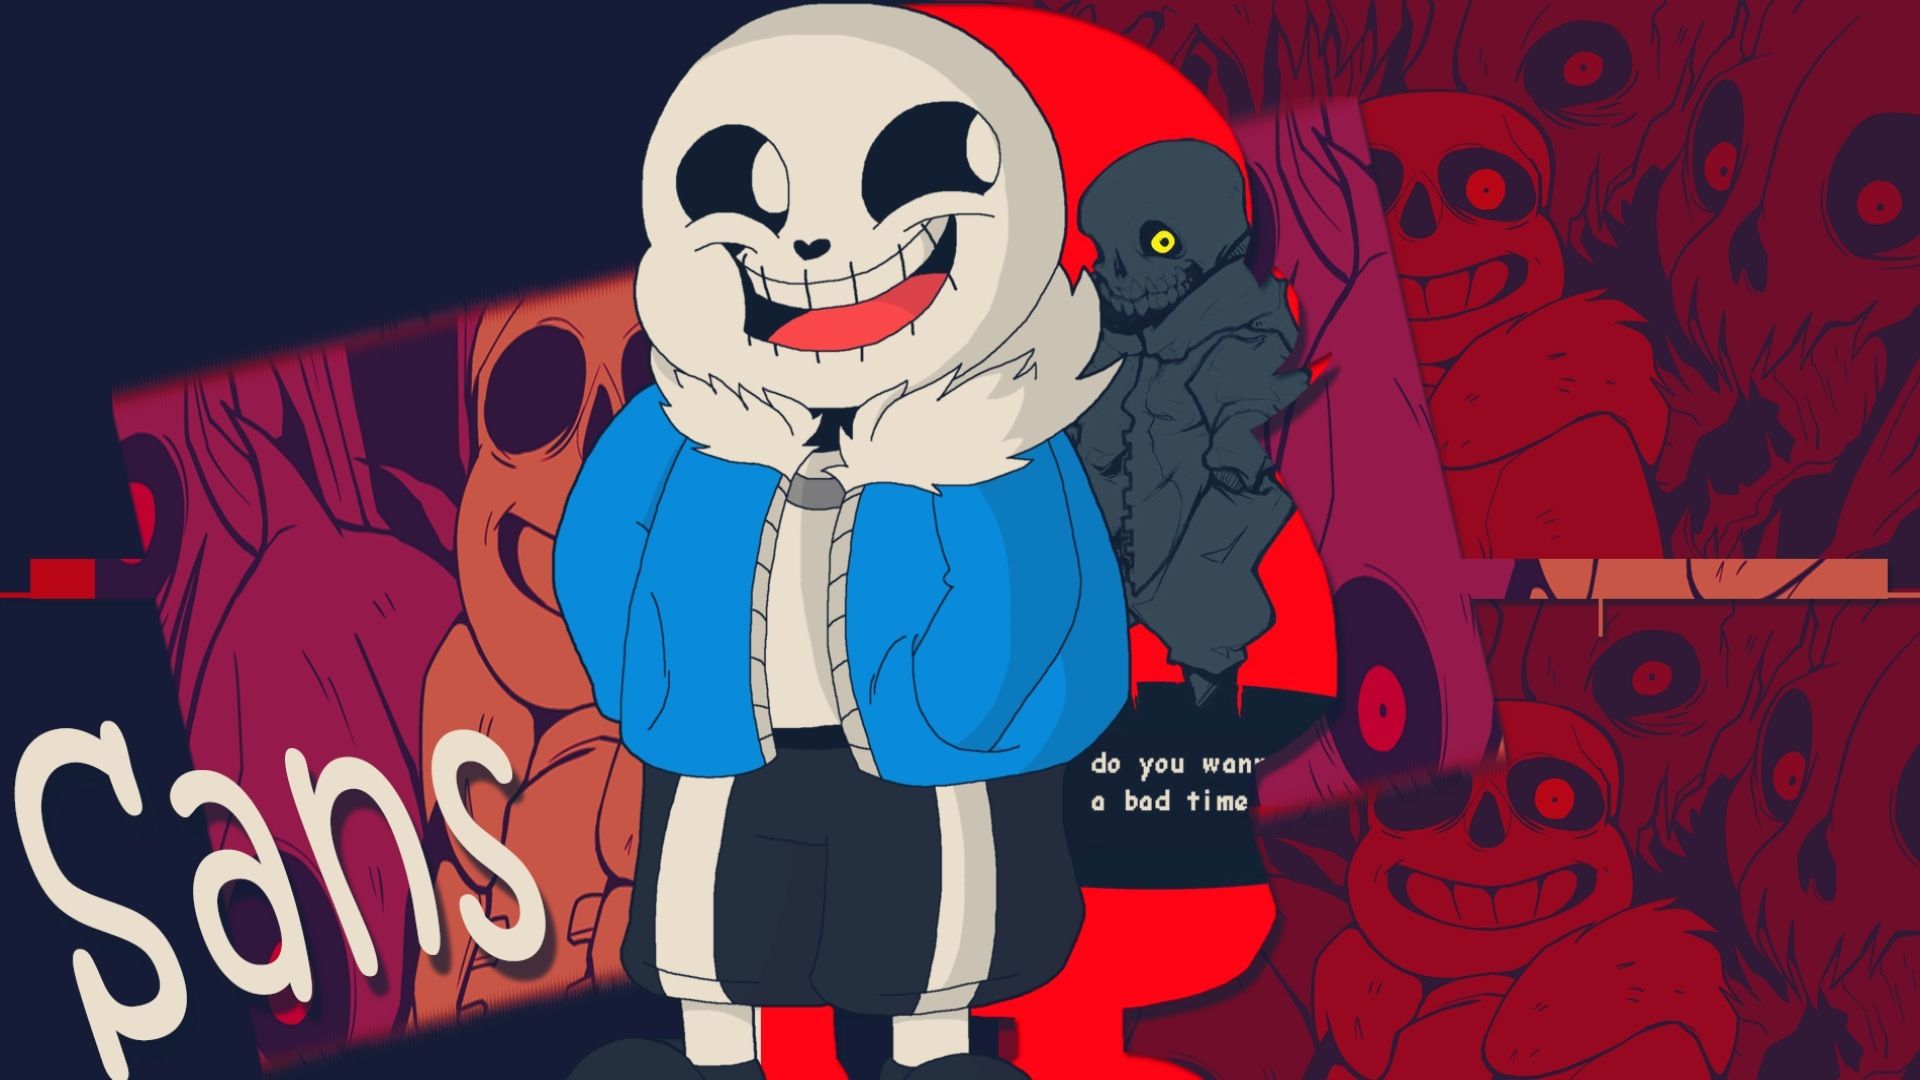 Sans Undertale Wallpapers HD + Things to Know Before You Start